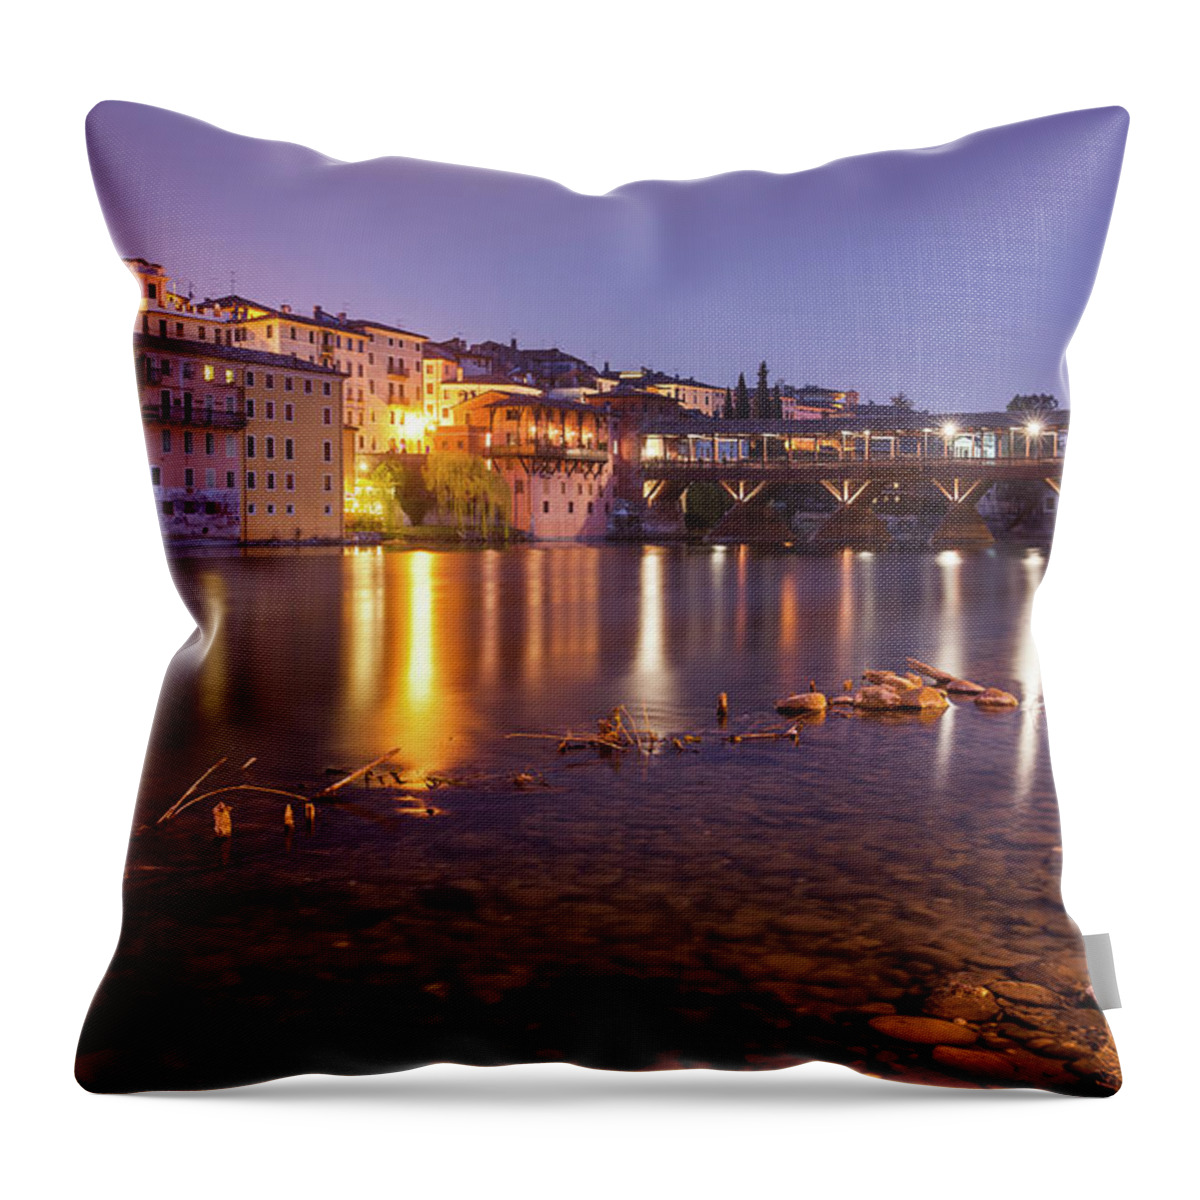 River Brenta Throw Pillow featuring the photograph Ponte Vecchio And Brenta River by Massimo Calmonte (www.massimocalmonte.it)